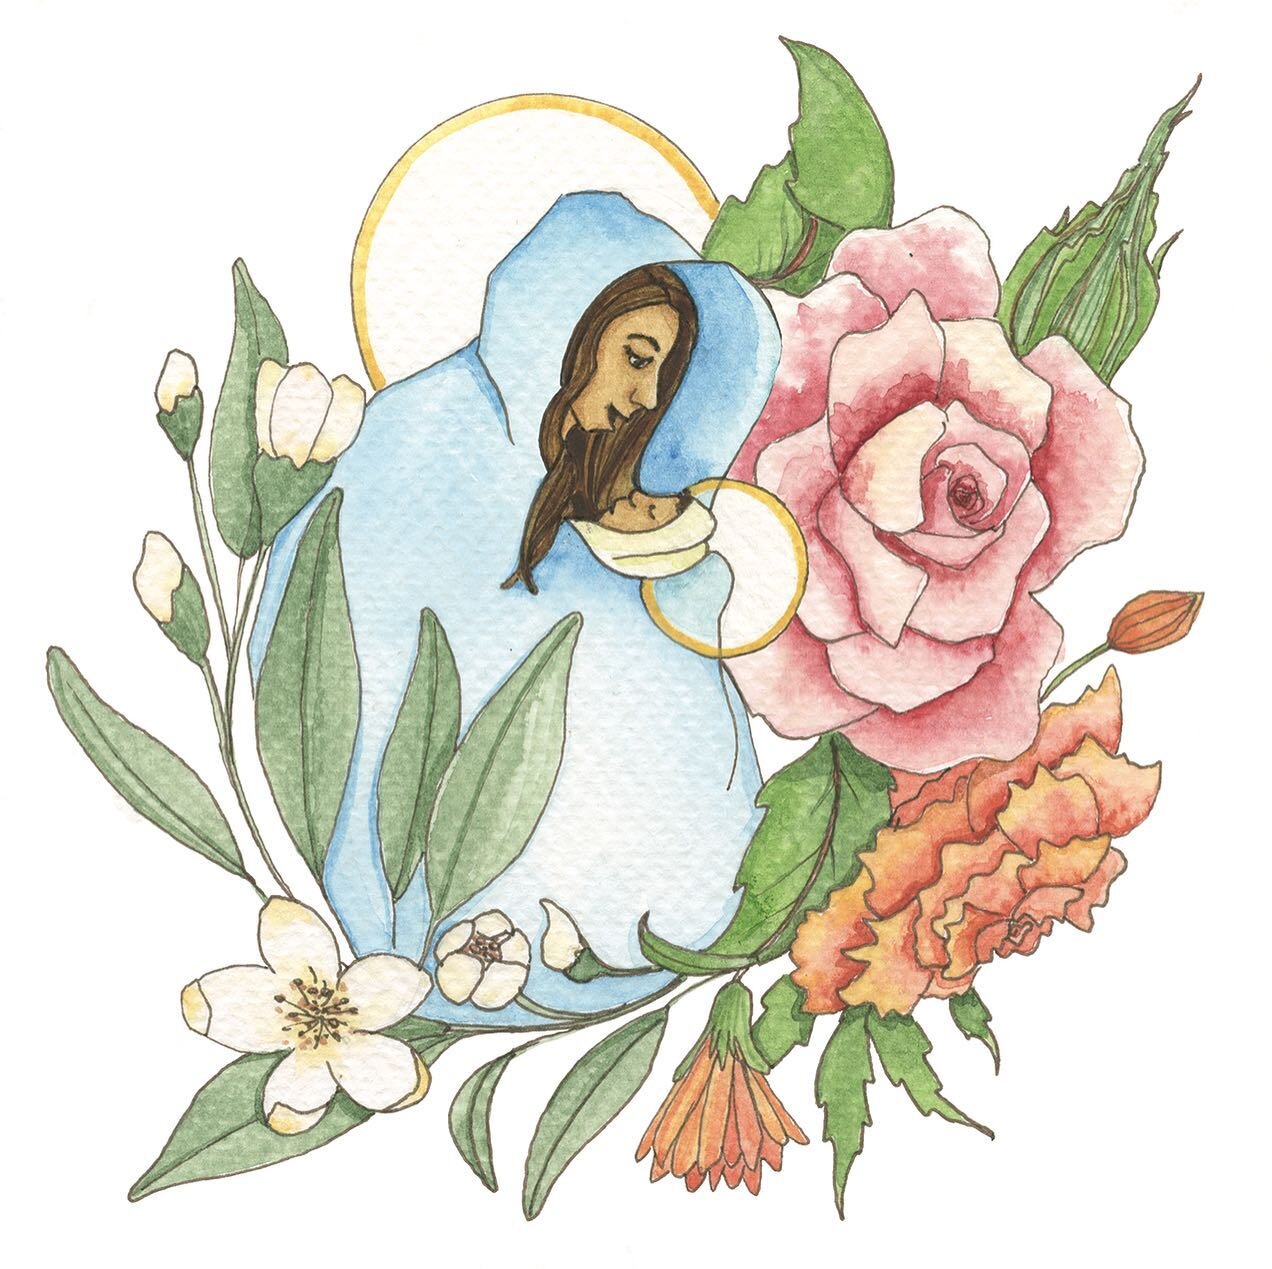 MARY 

&ldquo;And Mary said, &lsquo;Behold, I am the handmaiden of the Lord; let it be to me according to your word,&rsquo; &mdash; Luke 1:38 (RSV)

The mother of Jesus is a particular inspiration to me. It&rsquo;s easy to talk about Mary as a kind o